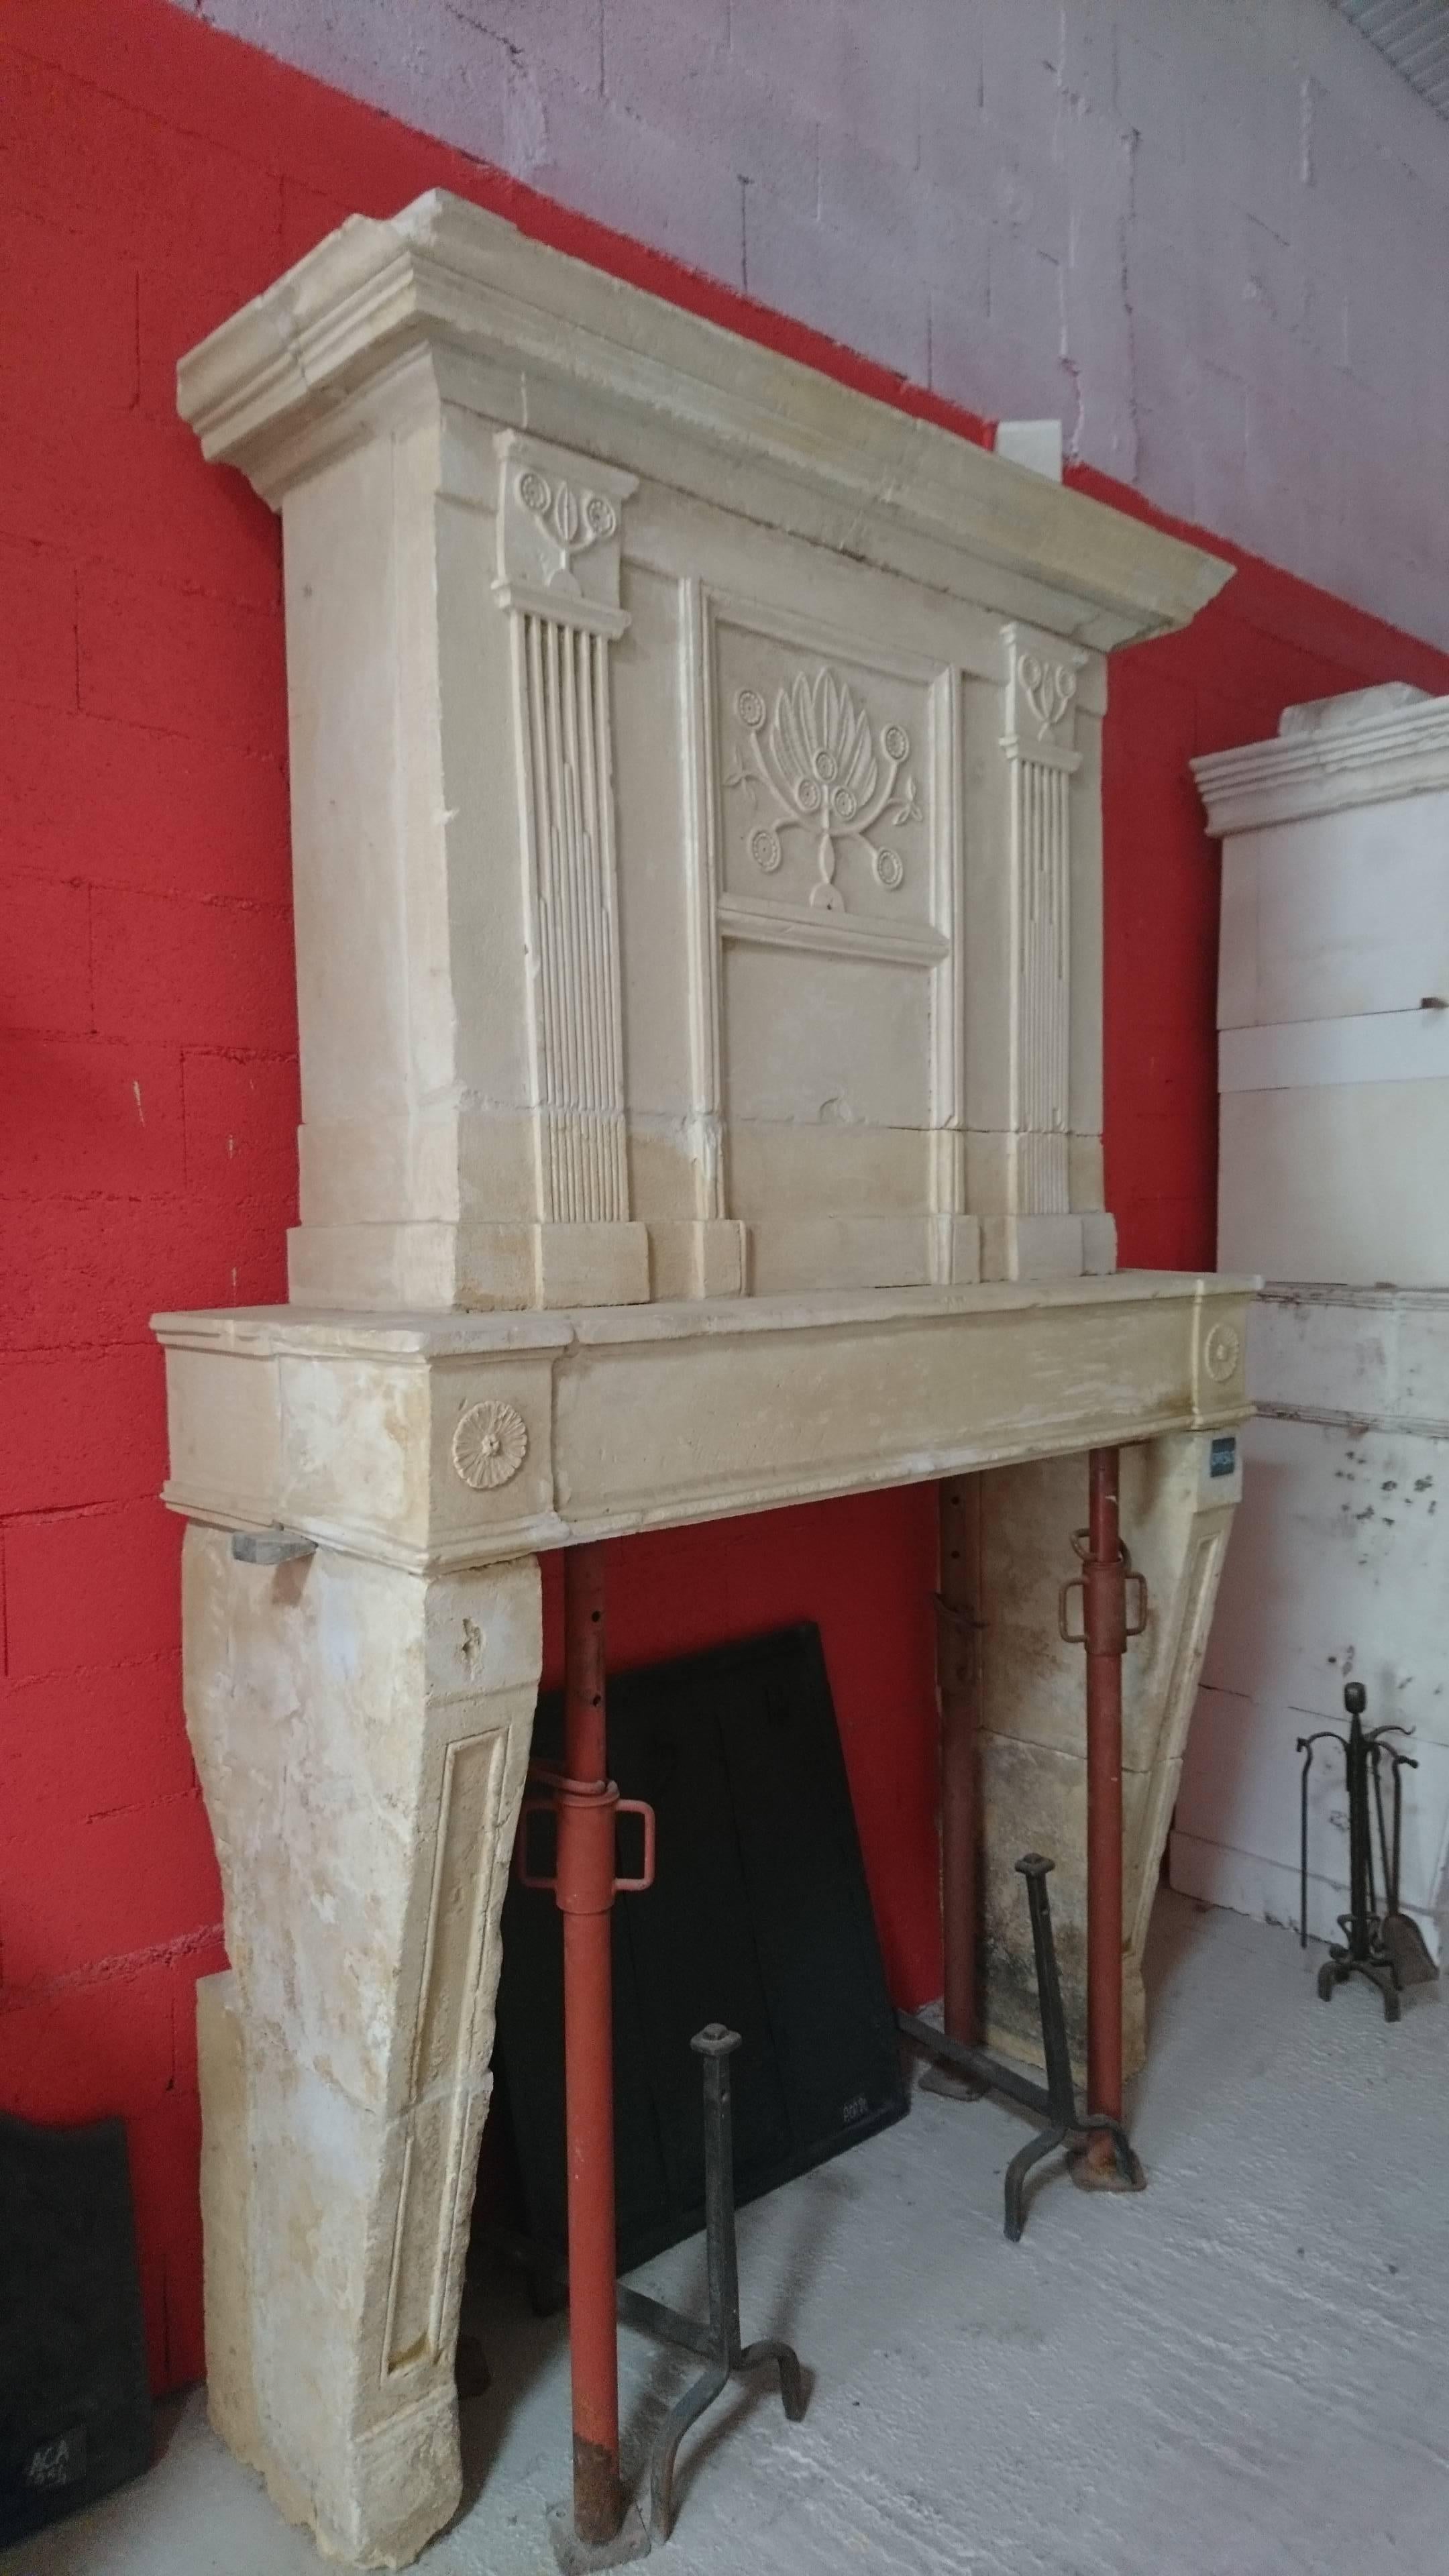 This Louis XVI (1754-1793) fireplace in Pierre de Thénac (a natural white hard limestone from subterranean quarries located in Poitou-Charentes region in France).

This fireplace reveals the skilled craftsmanship of the master stonecutter of the